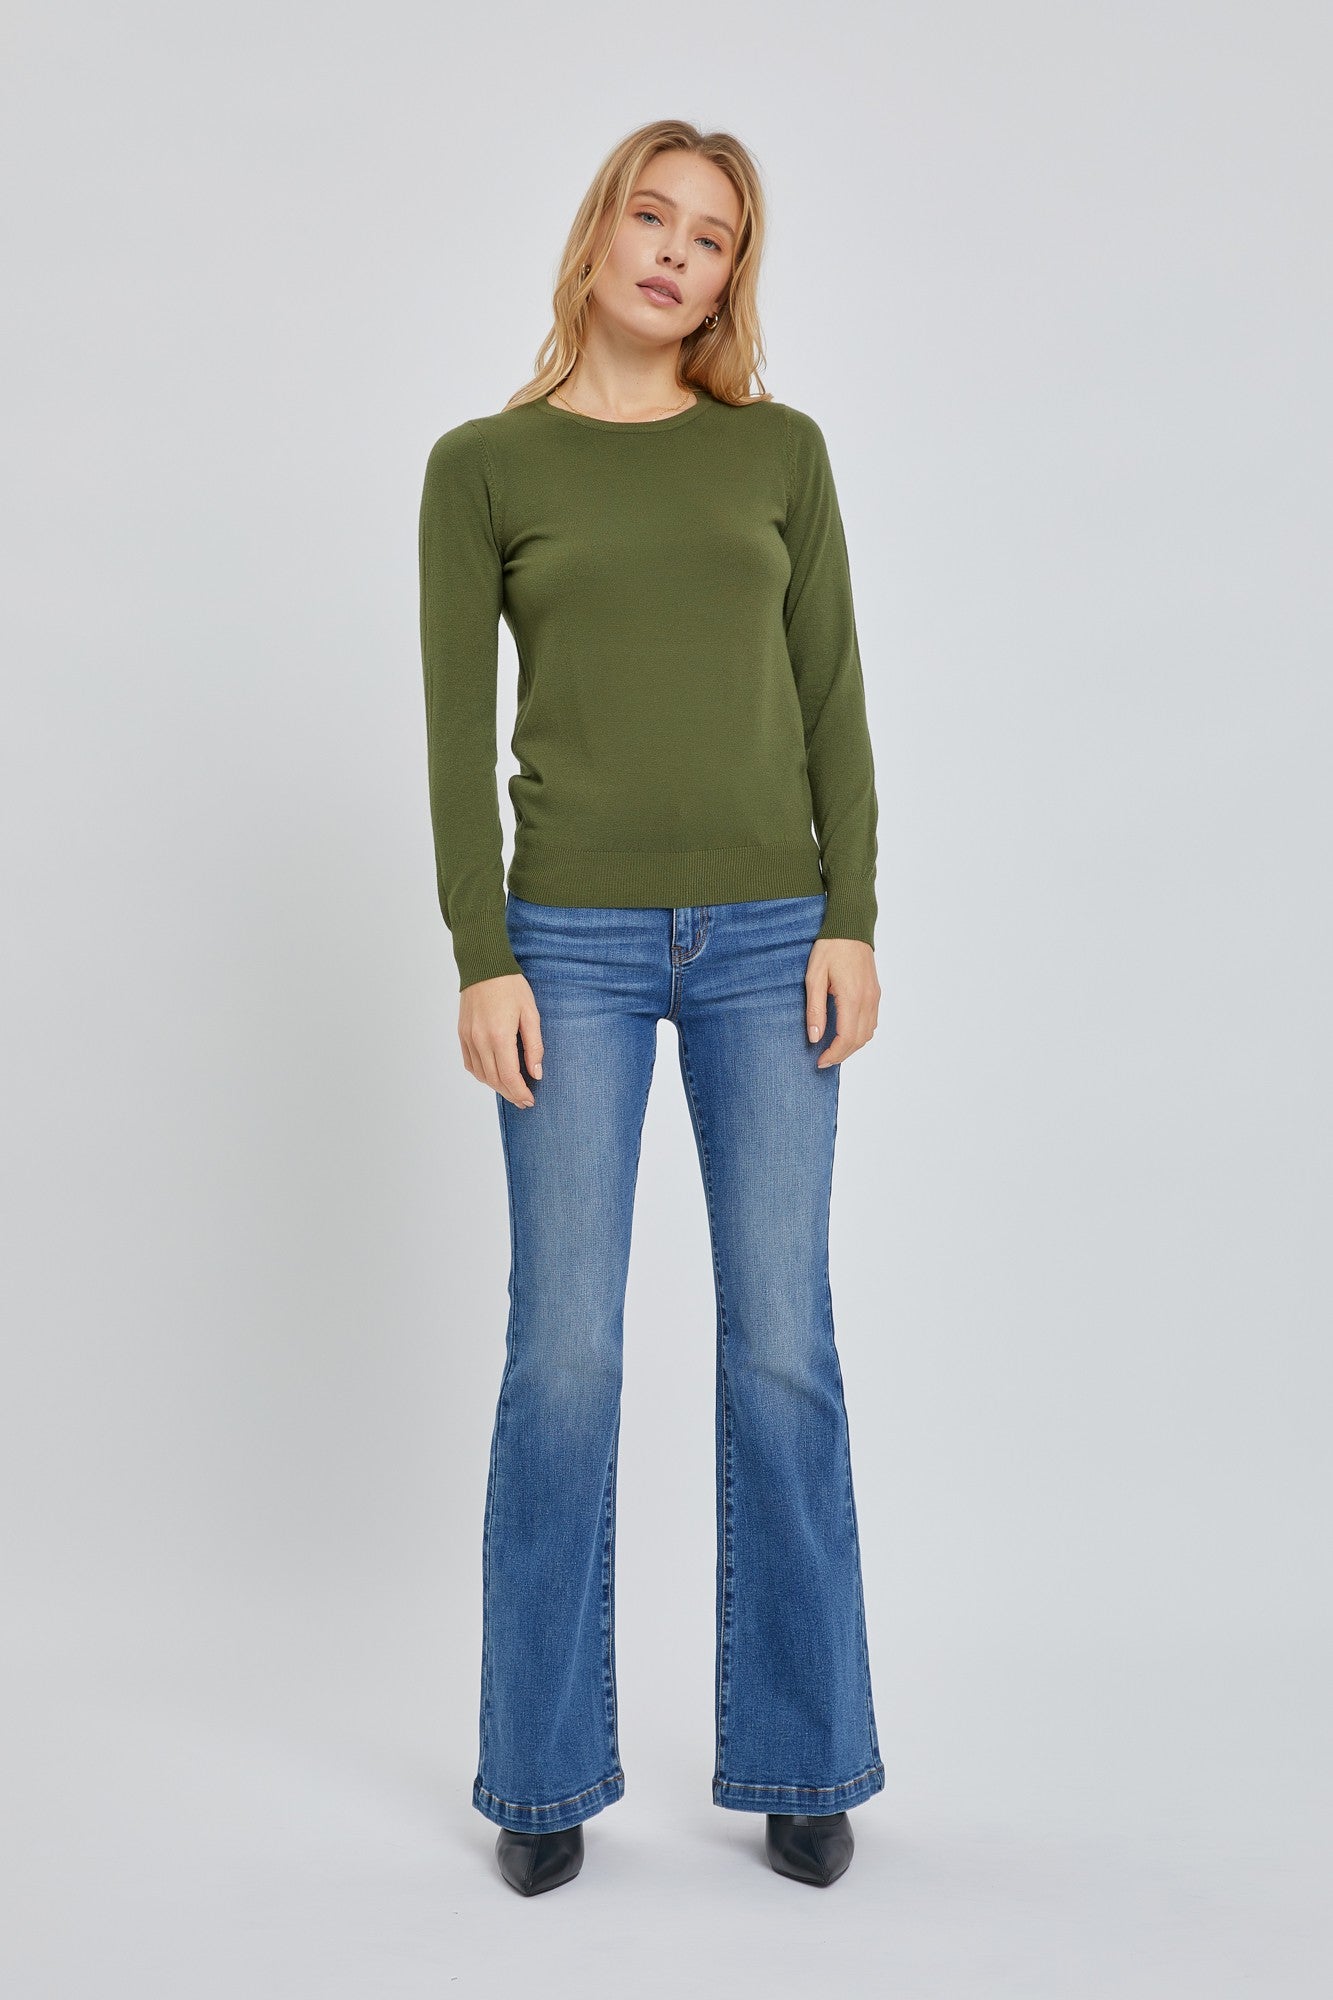 Olive Knit Long Sleeve Top